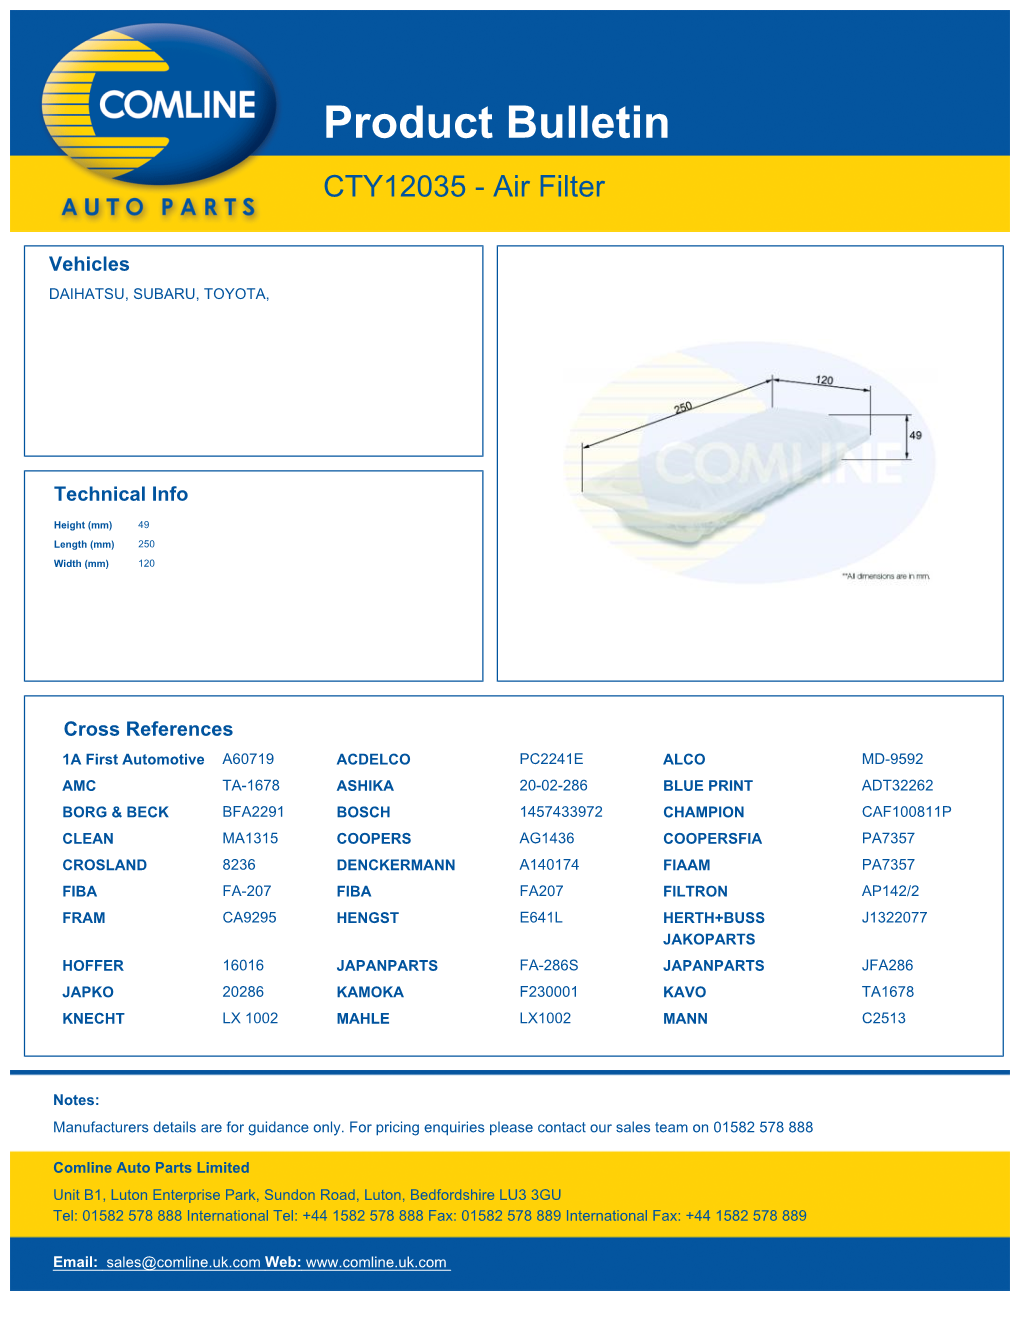 Product Bulletin CTY12035 - Air Filter